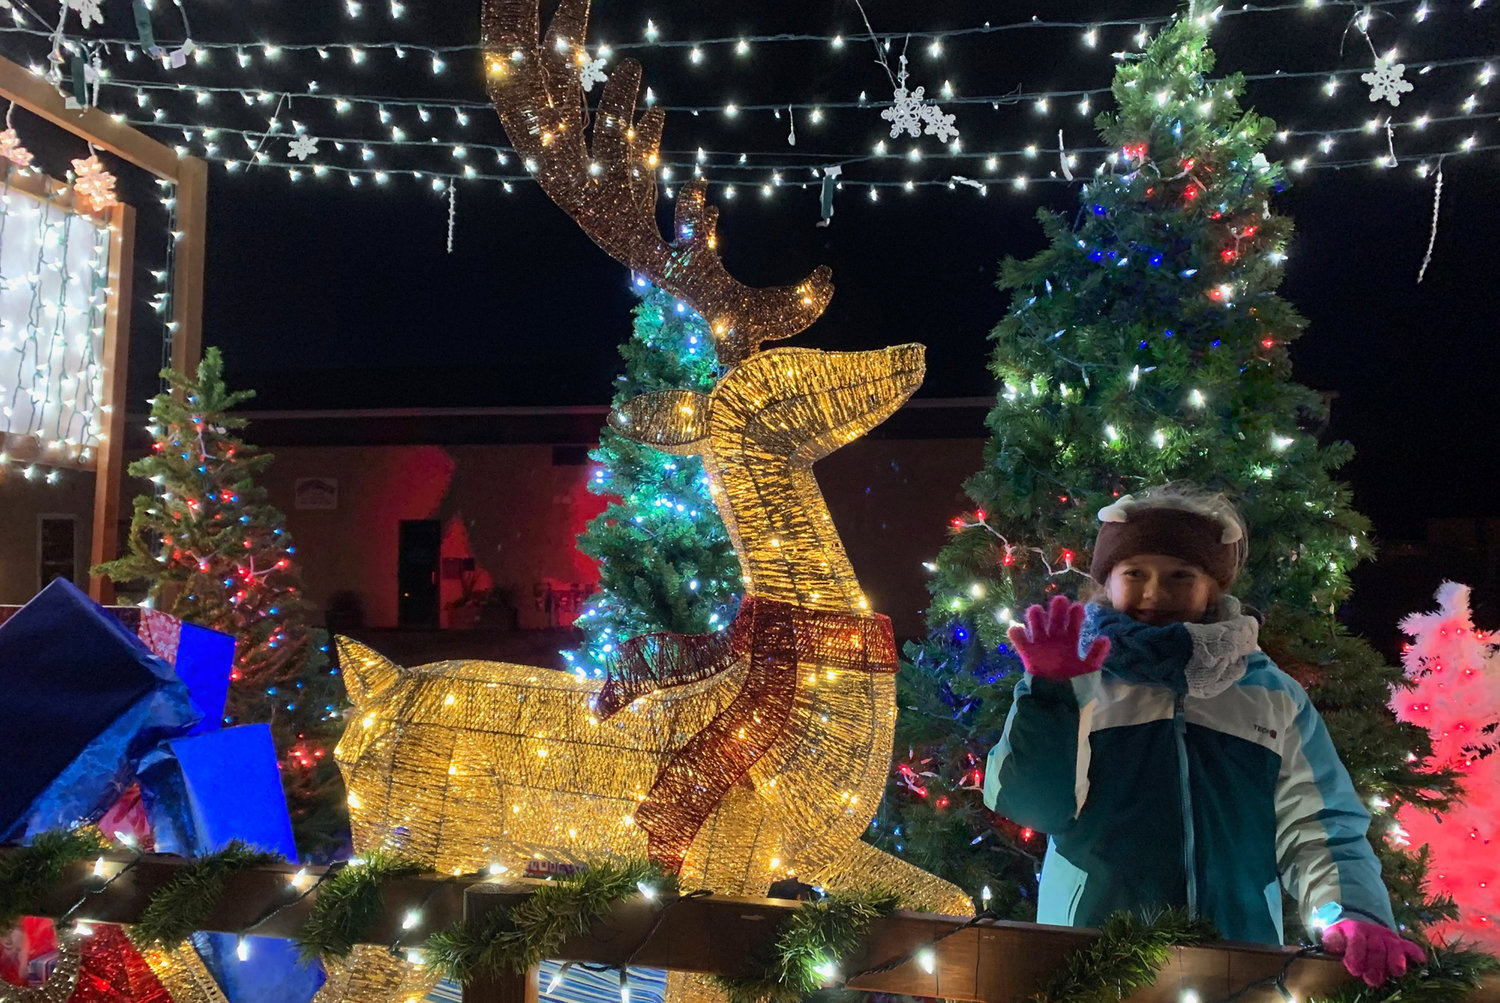 Light displays in Westerly are sure to enchant all ages